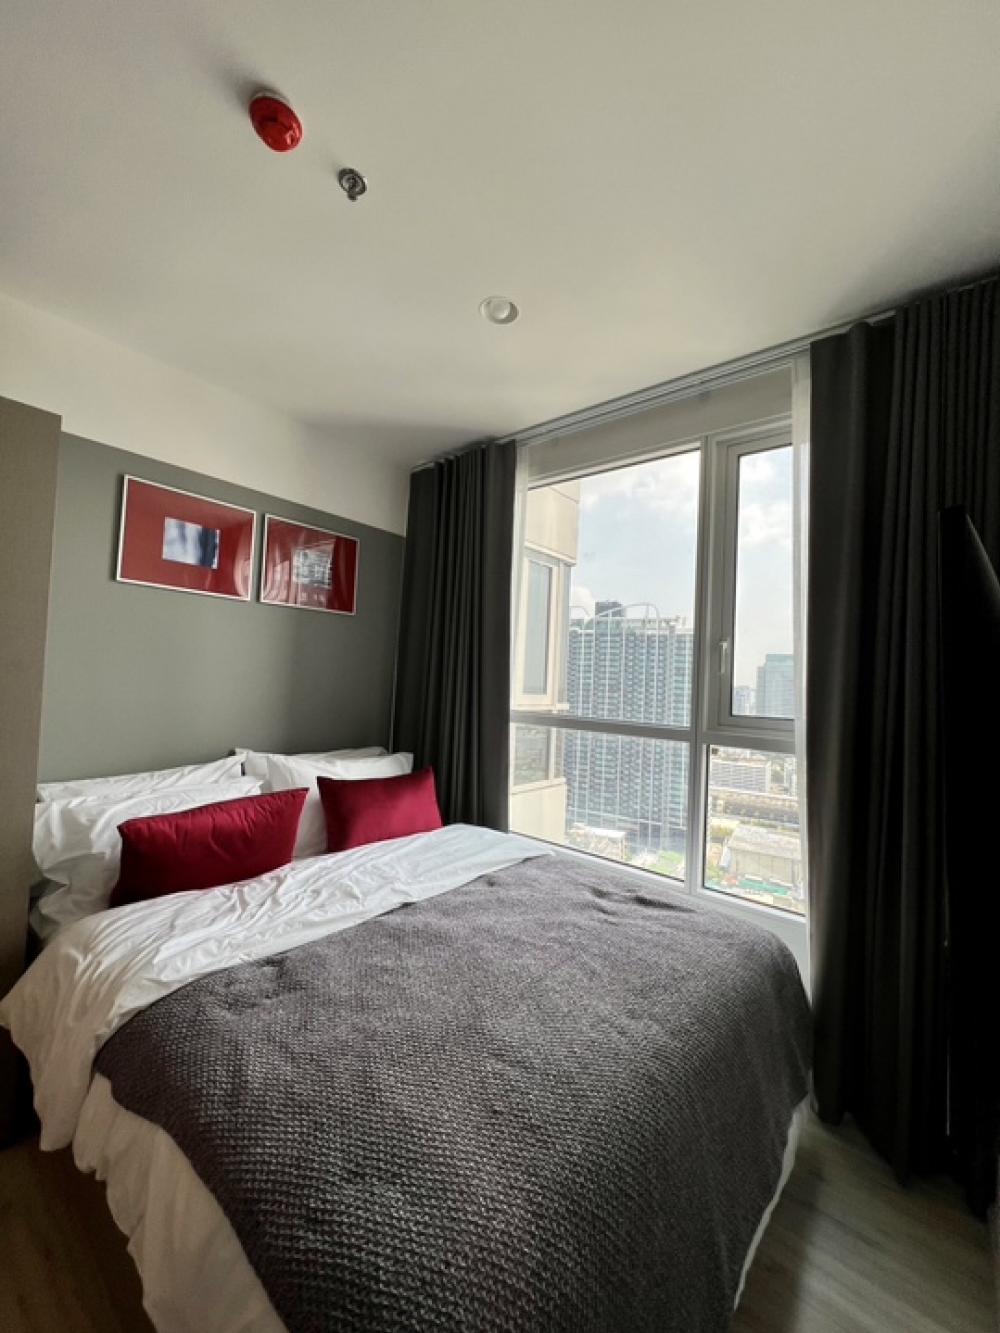 For RentCondoRatchadapisek, Huaikwang, Suttisan : 📌📌 New room for rent, XT Huai Khwang, fully furnished, ready to move in. If interested, you can make an appointment to see. welcome